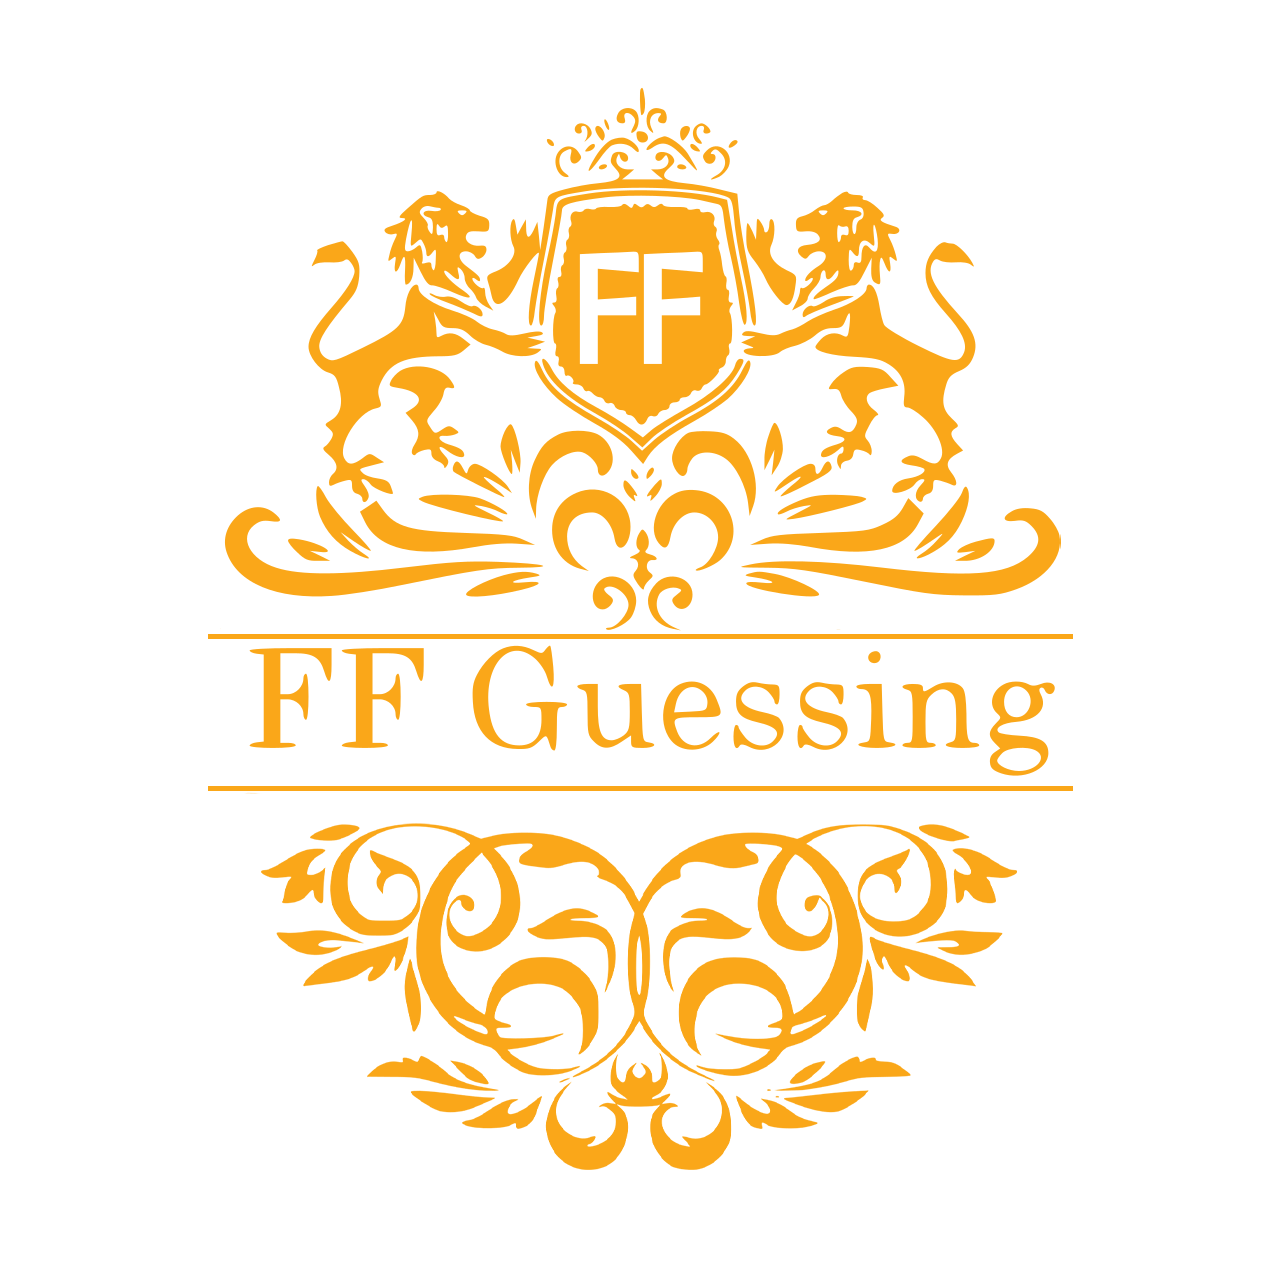 FF Guessing